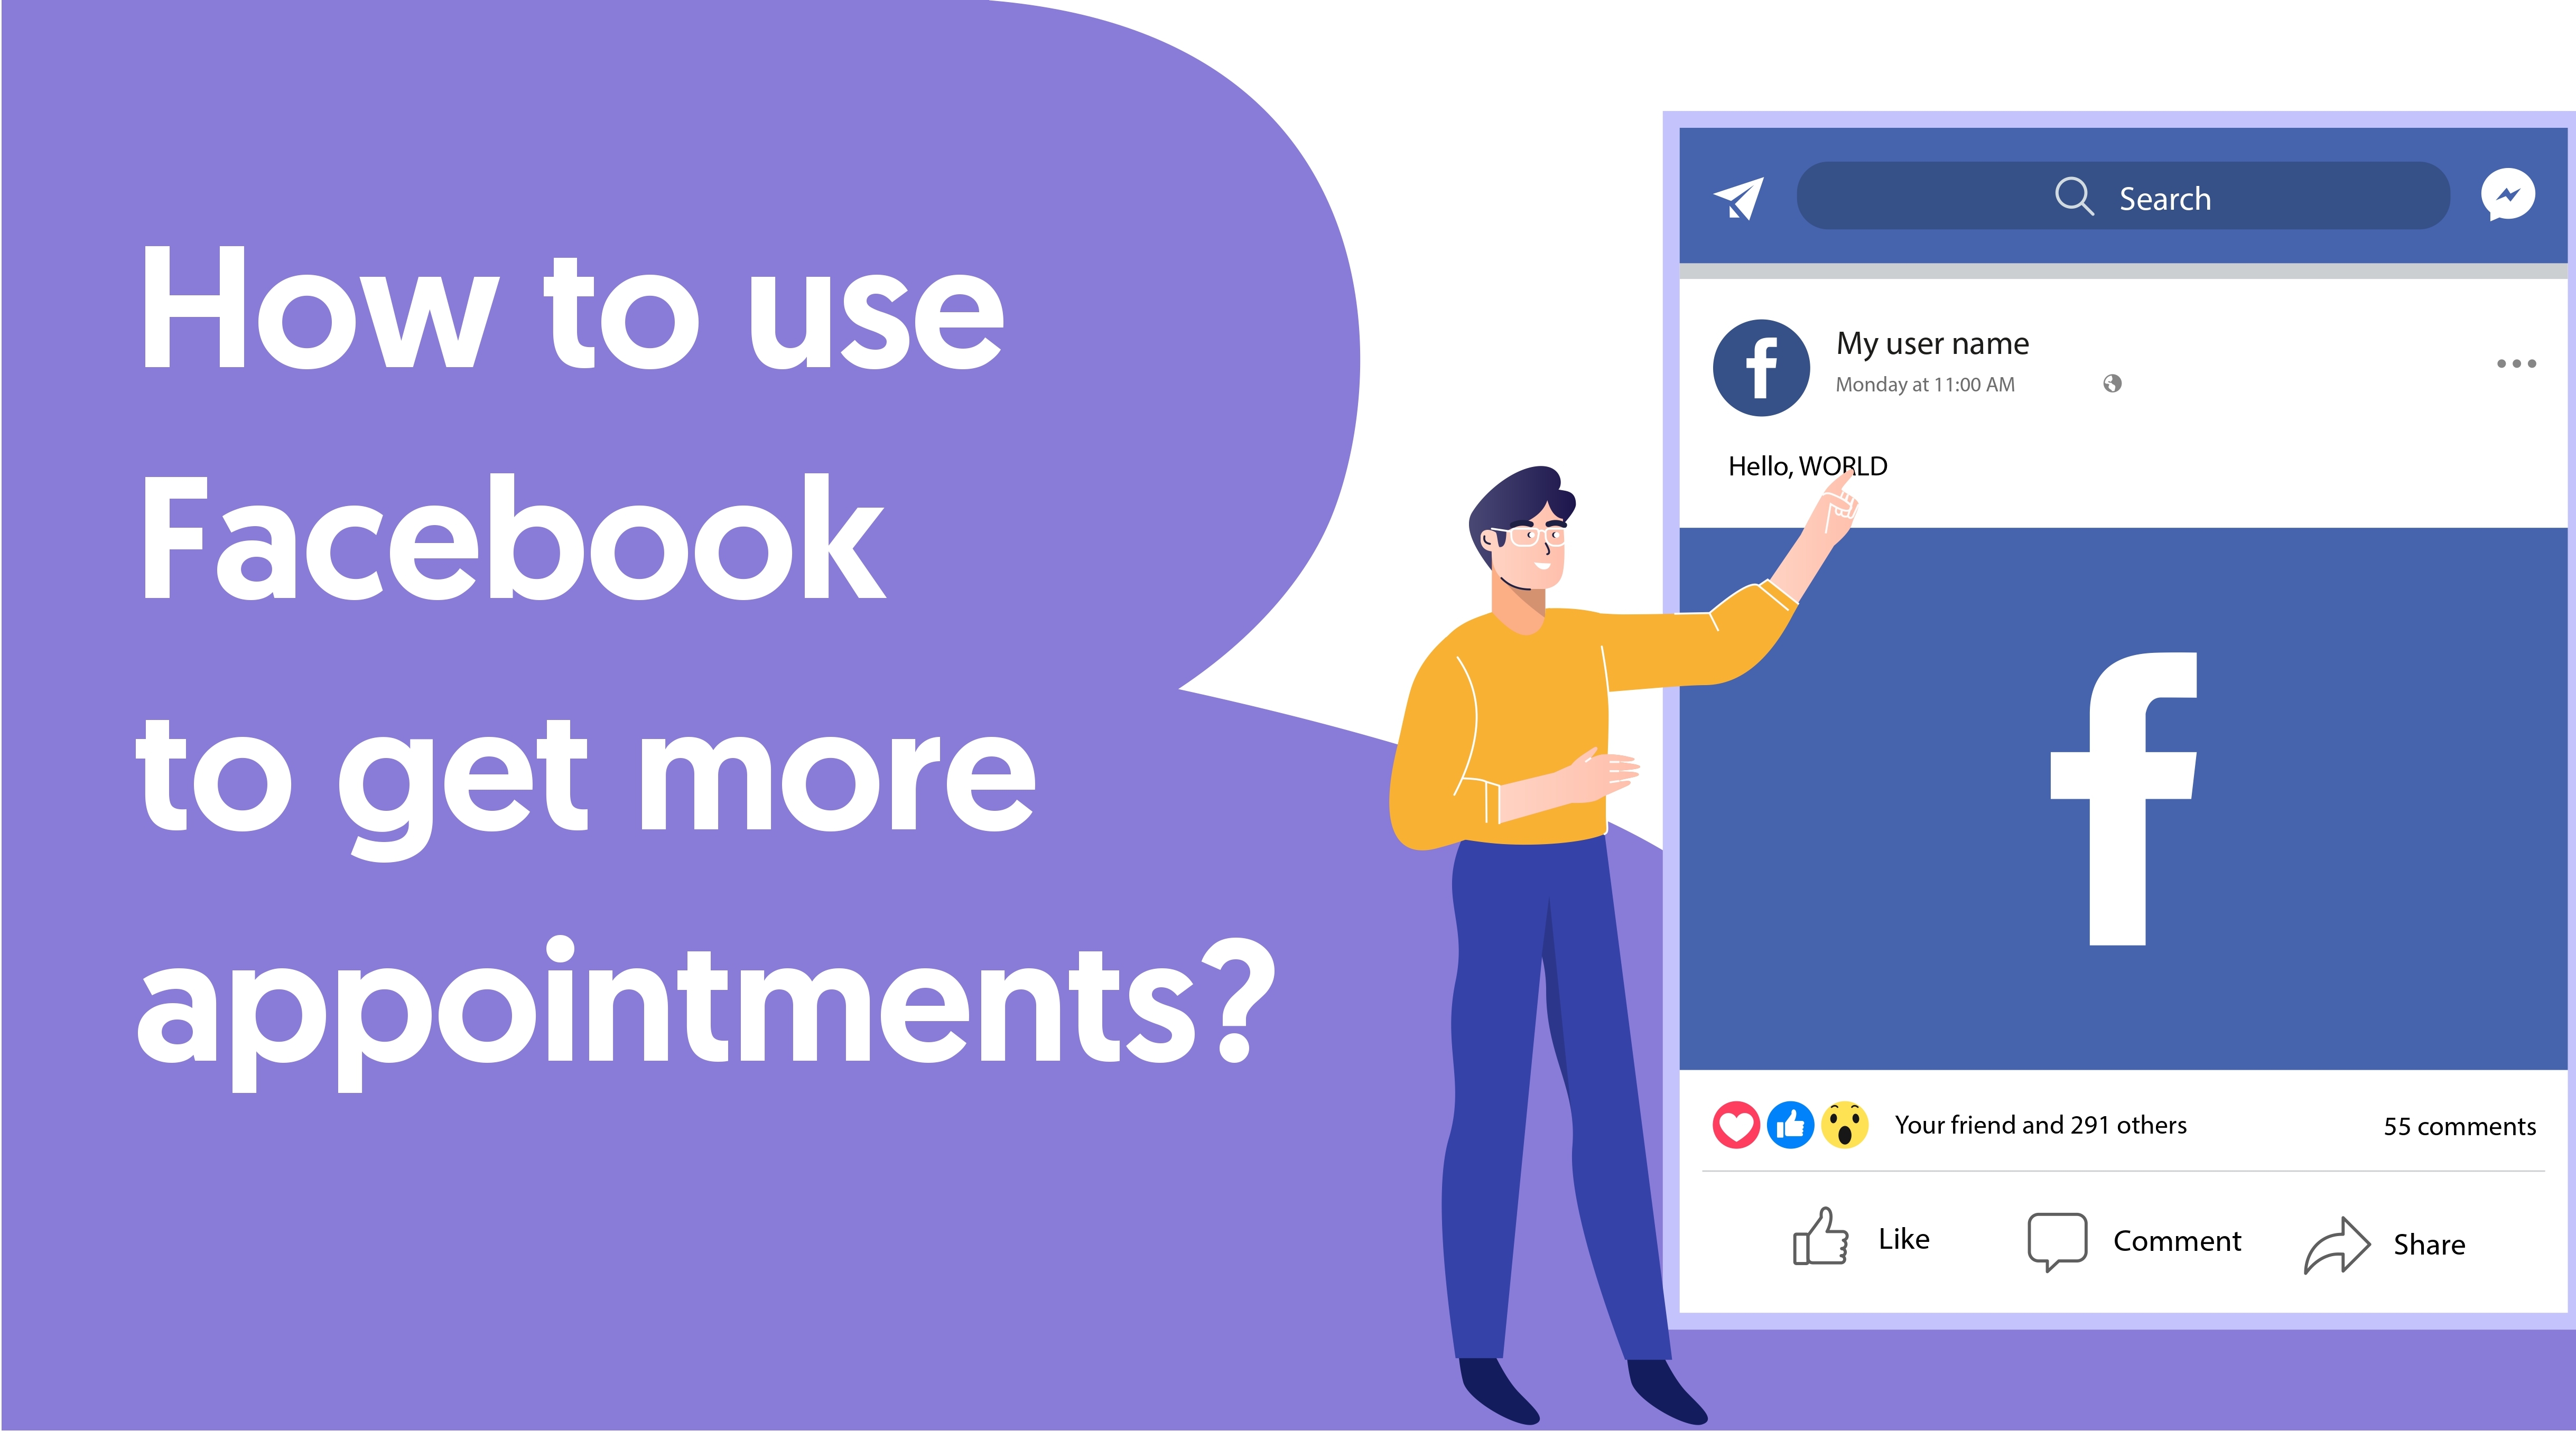 How to use Facebook to get more appointments